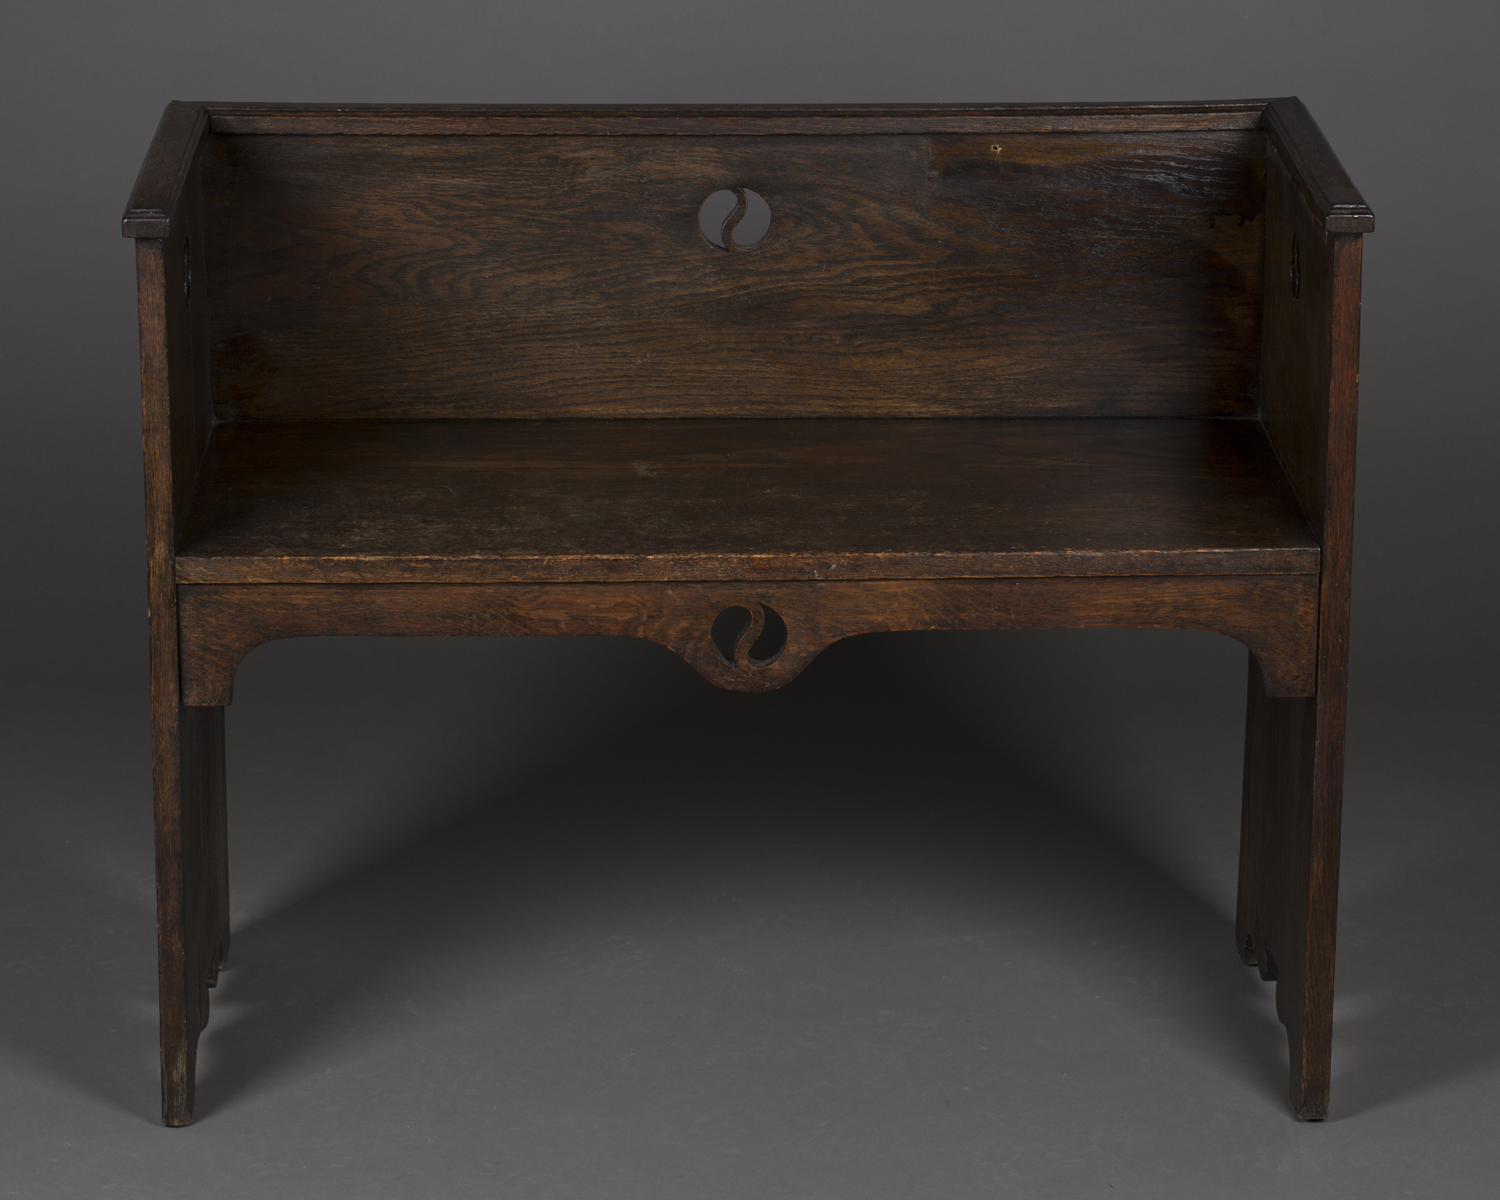 An early 20th century Arts and Crafts style stained oak hall bench, possibly by Liberty & Co, the - Image 3 of 4